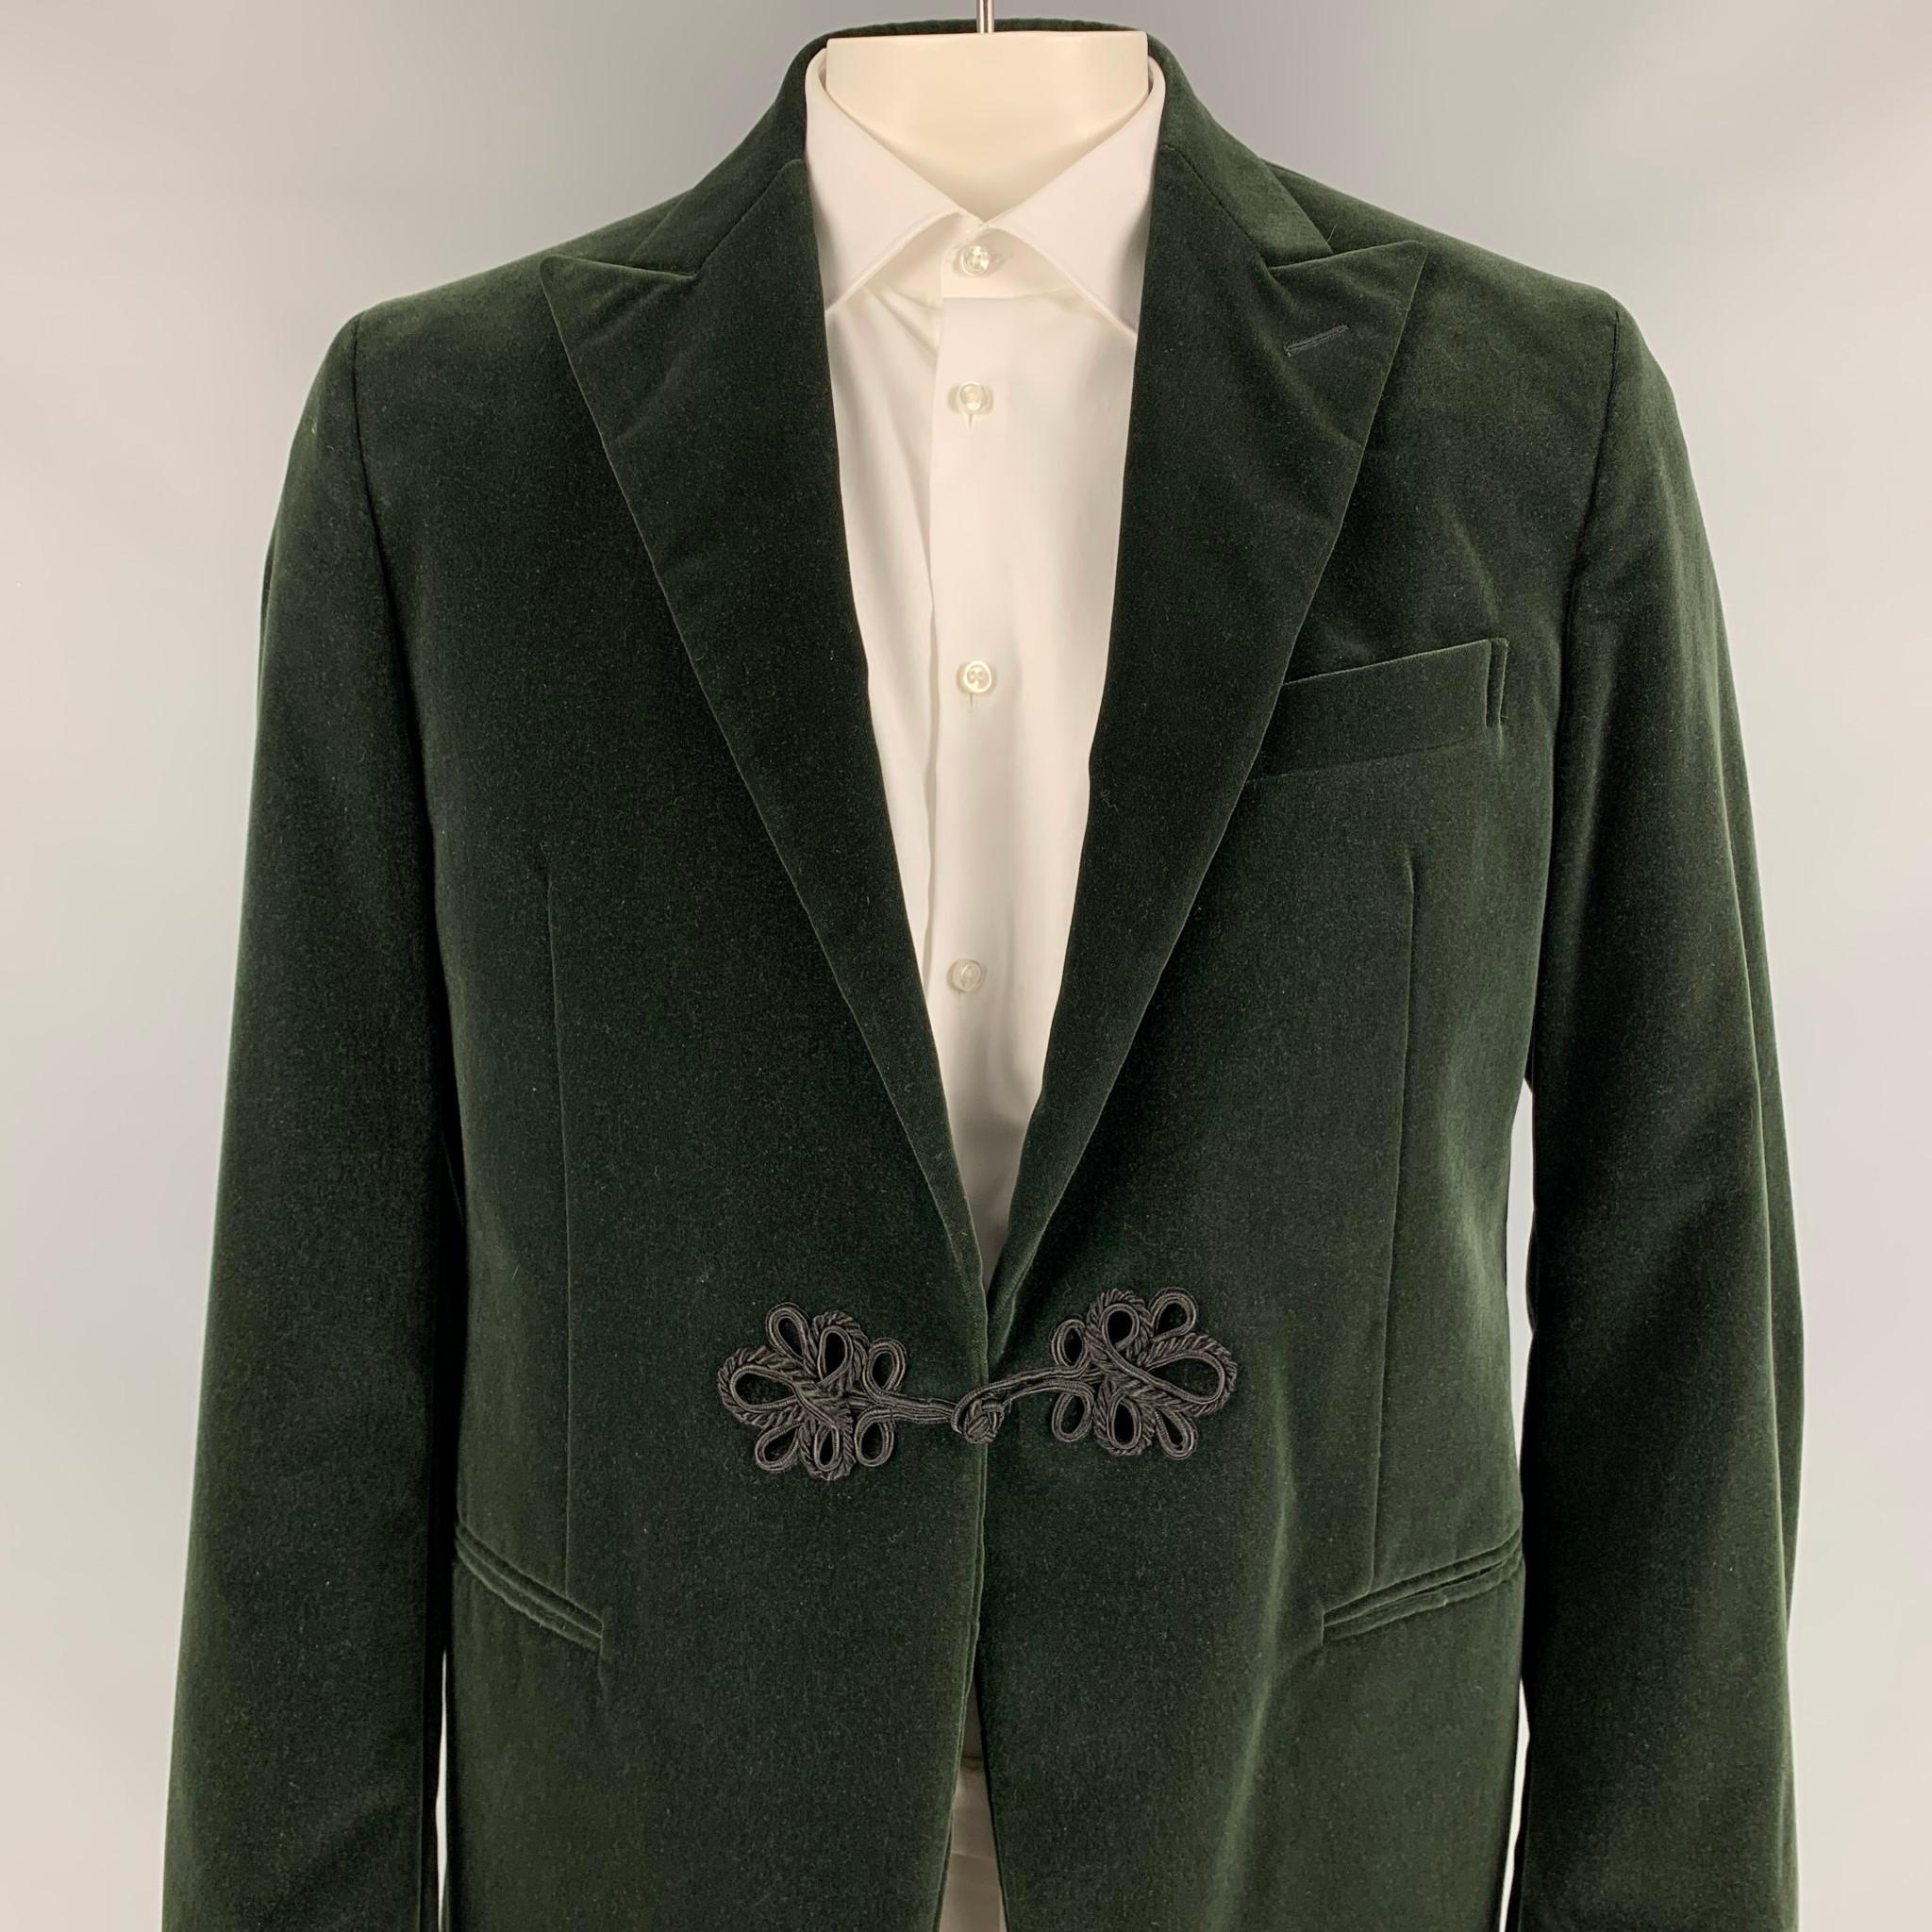 POLO by RALPH LAUREN sport coat comes in a green velvet with a full liner featuring a peak lapel, slit pockets, and a toggle button closure. Made in Italy. 

Very Good Pre-Owned Condition.
Marked: 44 R

Measurements:

Shoulder: 18.5 in.
Chest: 44